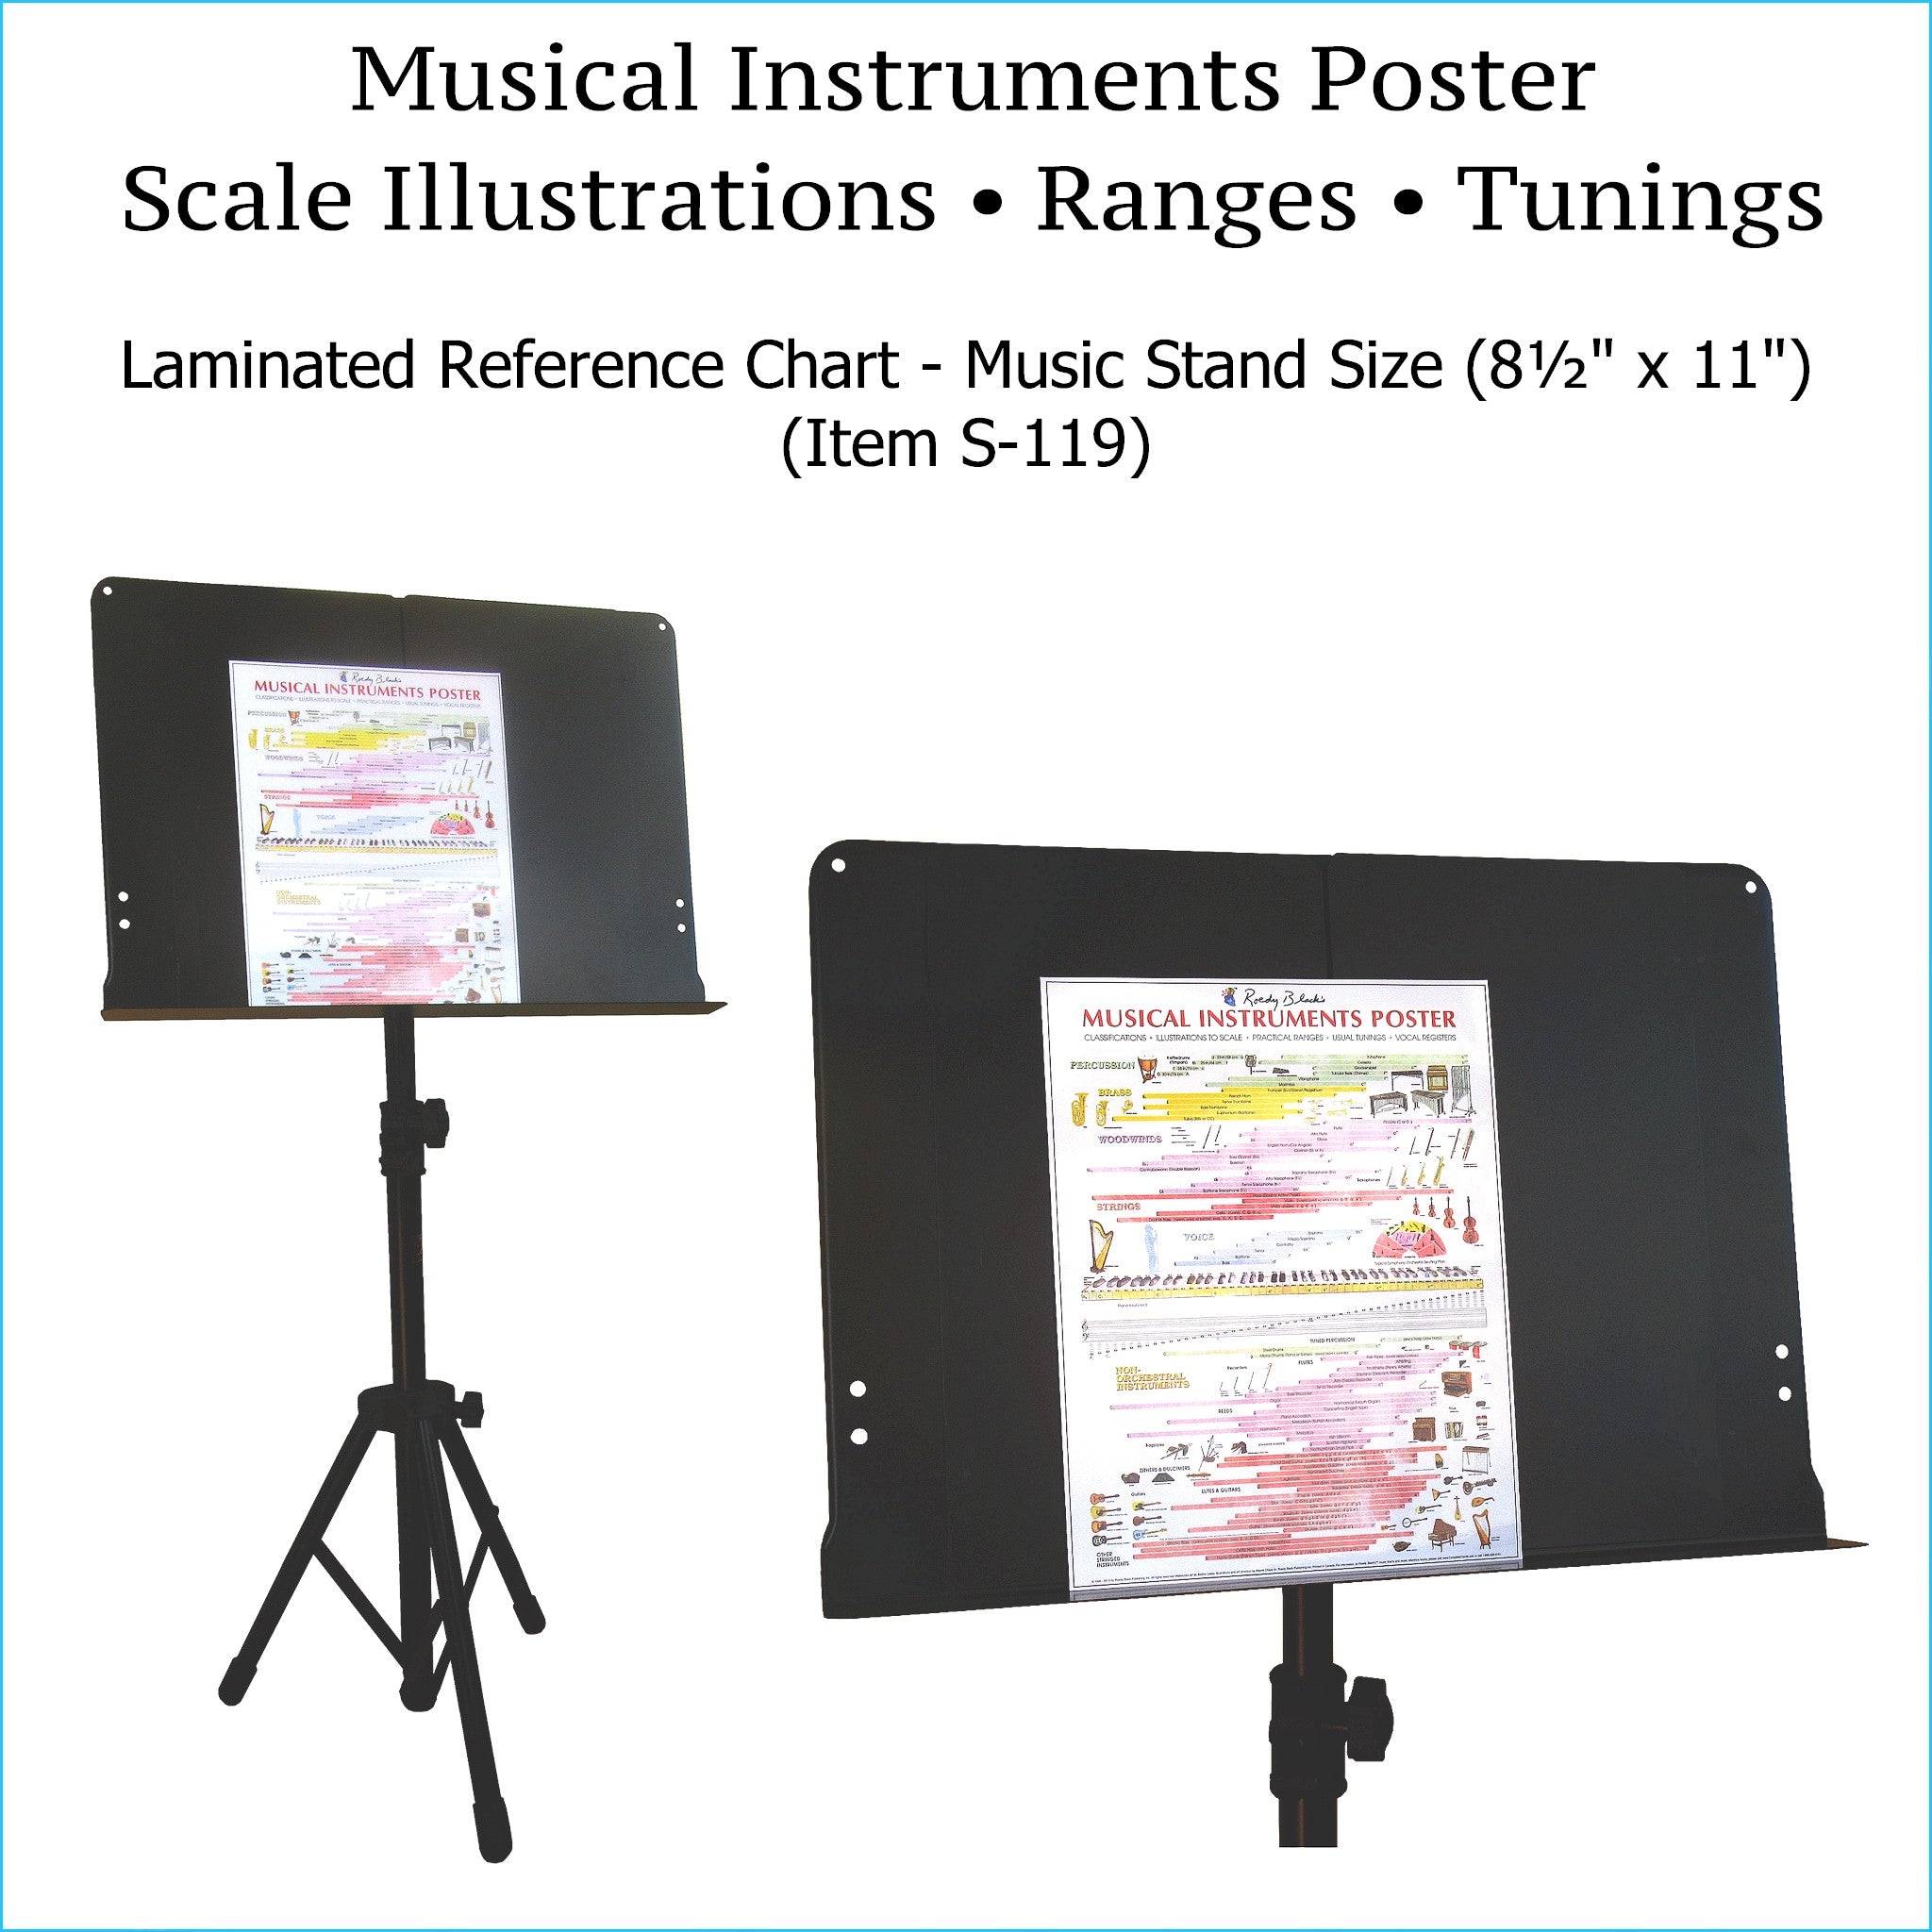 Musical instruments poster, music stand size.